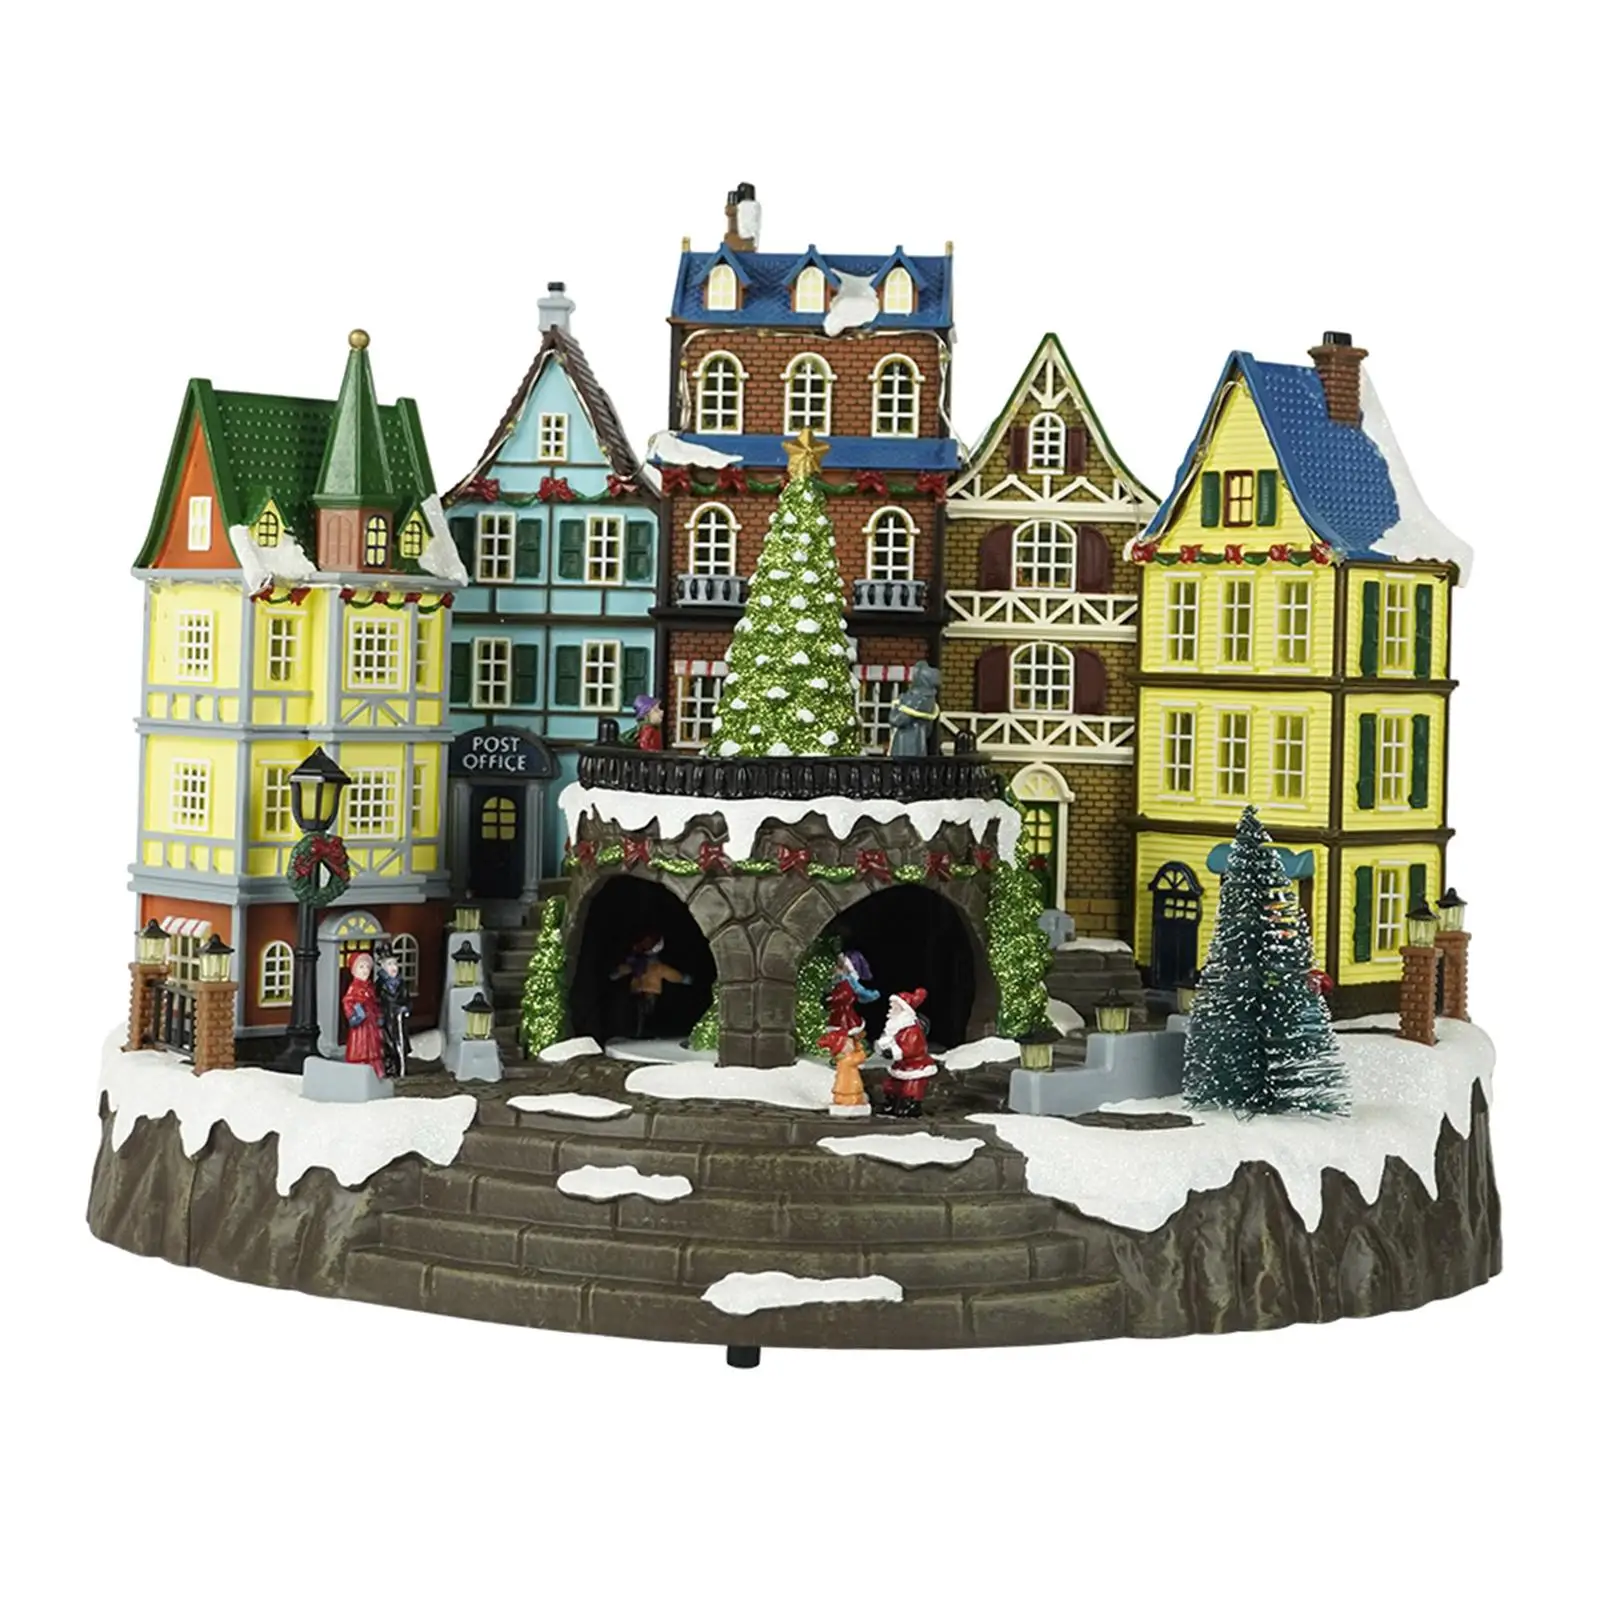 

Christmas Snow Scene House LED Lighting Village Cottage Rendering Atmosphere Battery Operated with Music Ornaments for Bedroom